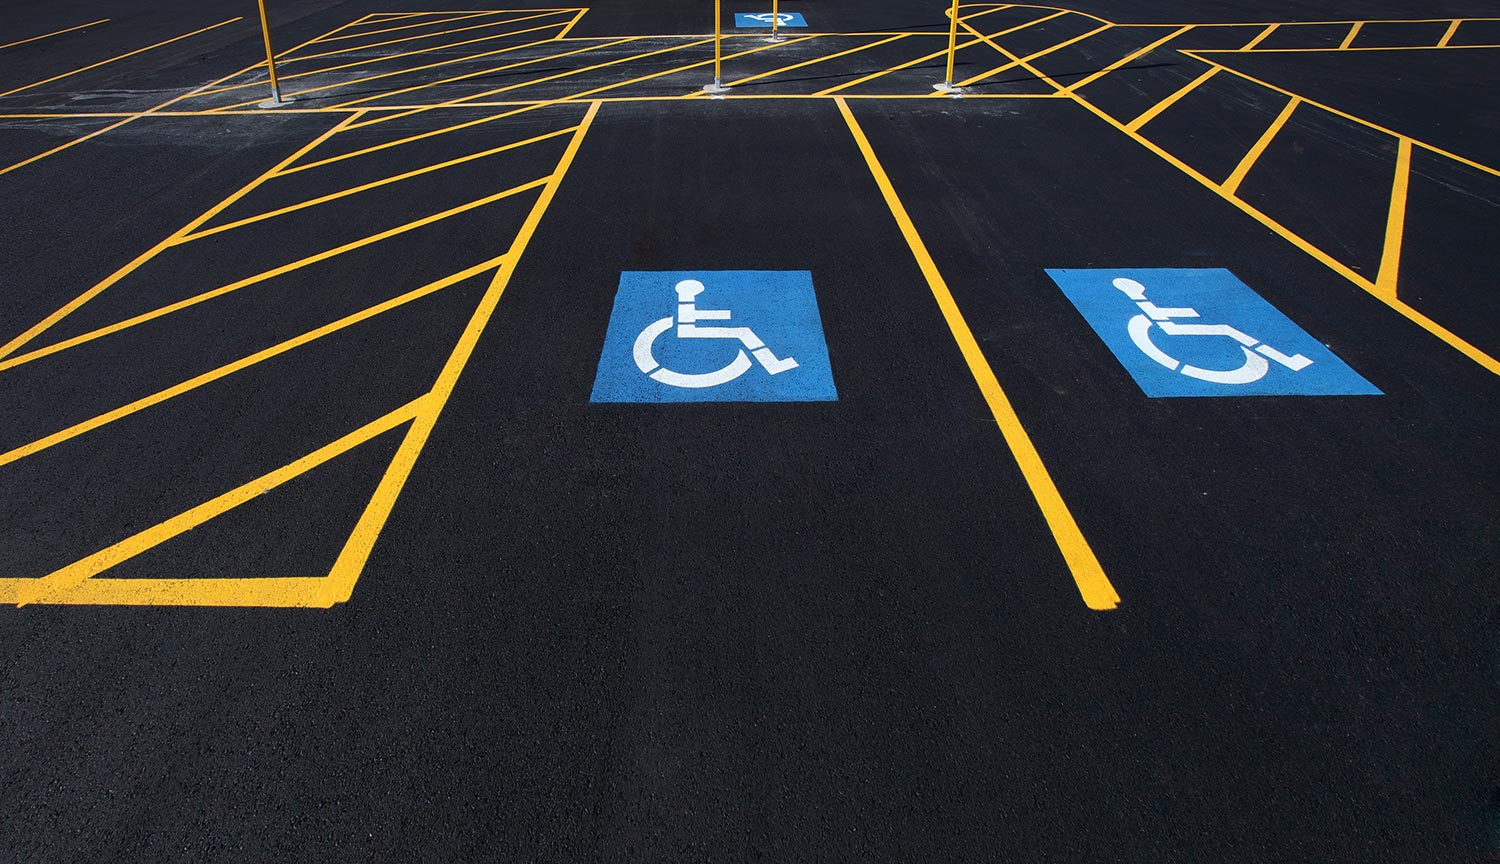 The international markings for a handicapped parking stall in a parking lot